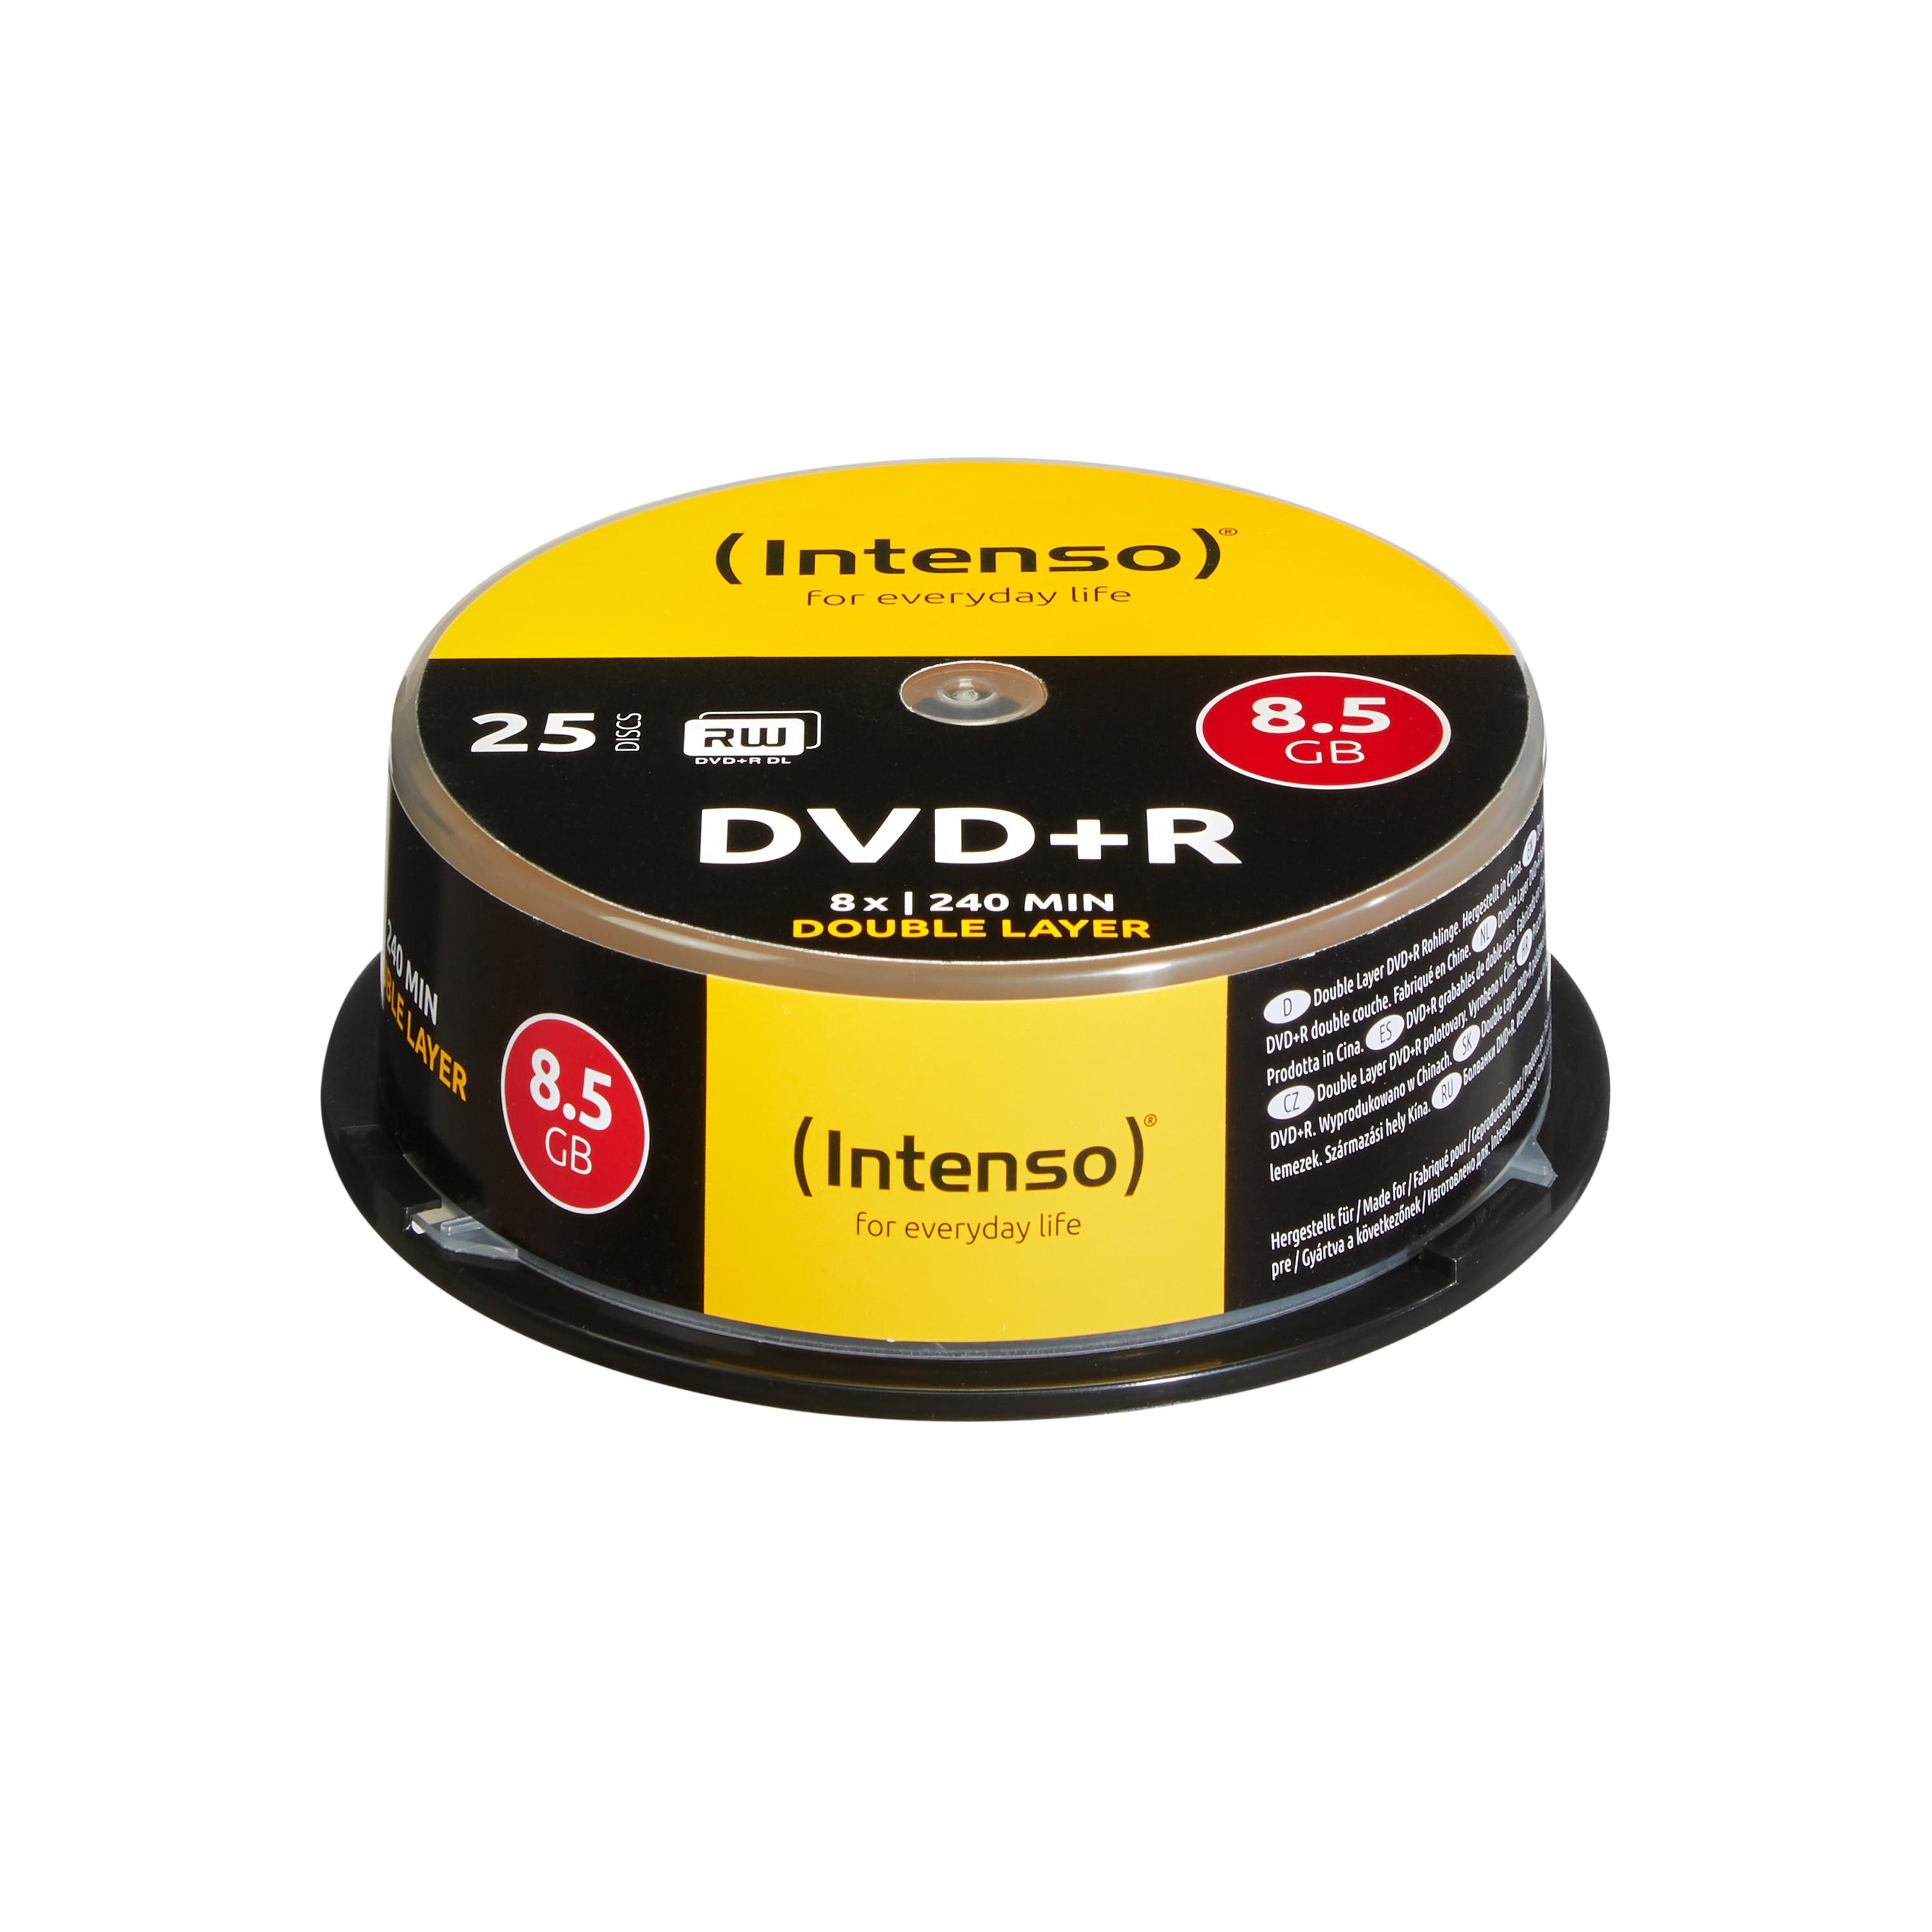 Intenso DVD+R 8.5GB 8x Double Layer 25er Cakebox